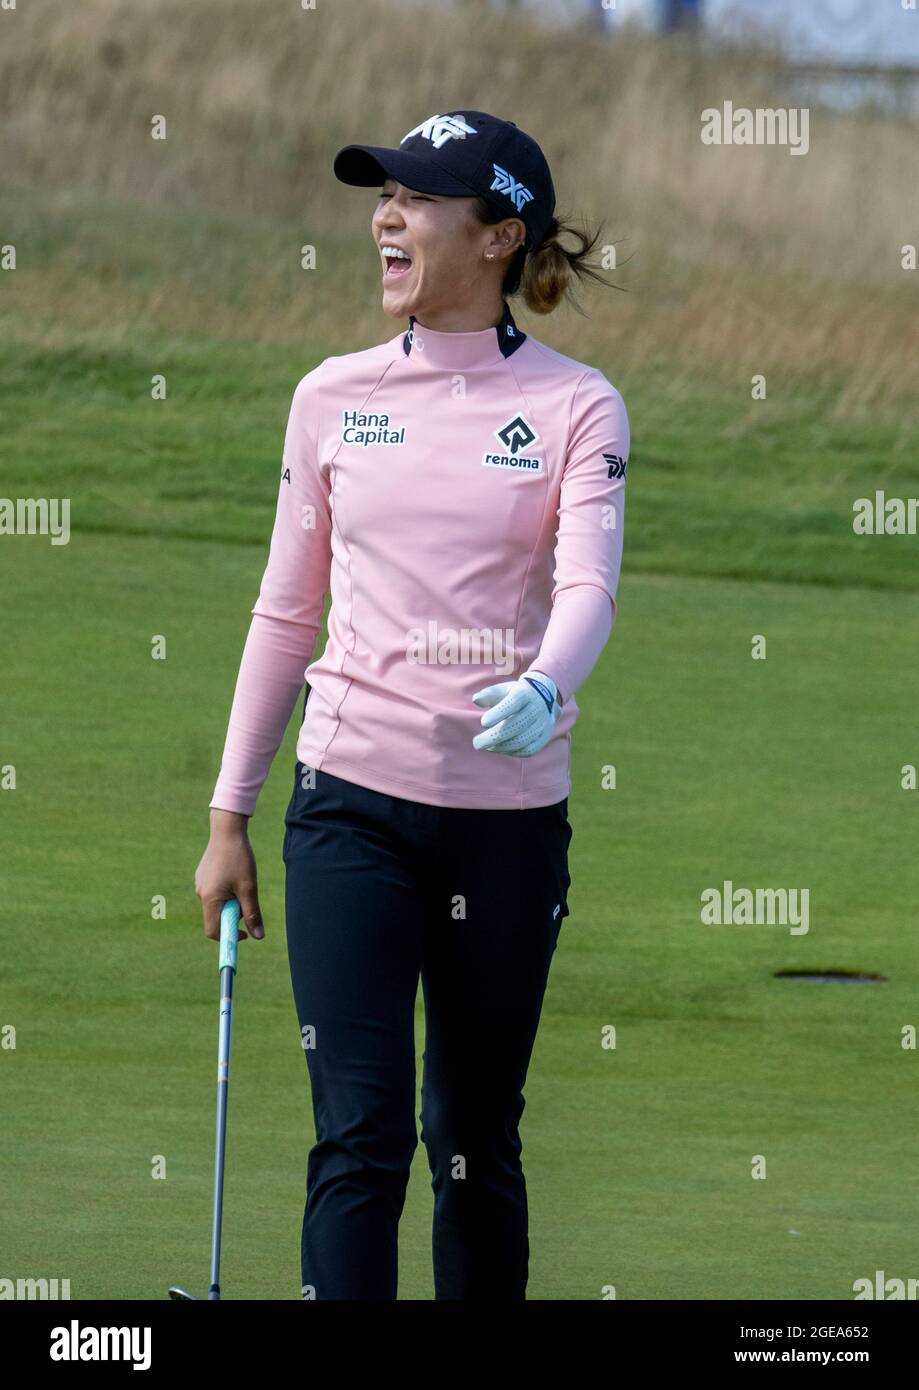 New Zealand's Lydia Ko call smiles after her chip shot went close on the 15th green during a preview day ahead of the AIG Women's Open at Carnoustie. Picture date: Wednesday August 18, 2021. See PA story GOLF Women. Photo credit should read: Ian Rutherford/PA Wire. RESTRICTIONS: Use subject to restrictions. Editorial use only, no commercial use without prior consent from rights holder. Stock Photo